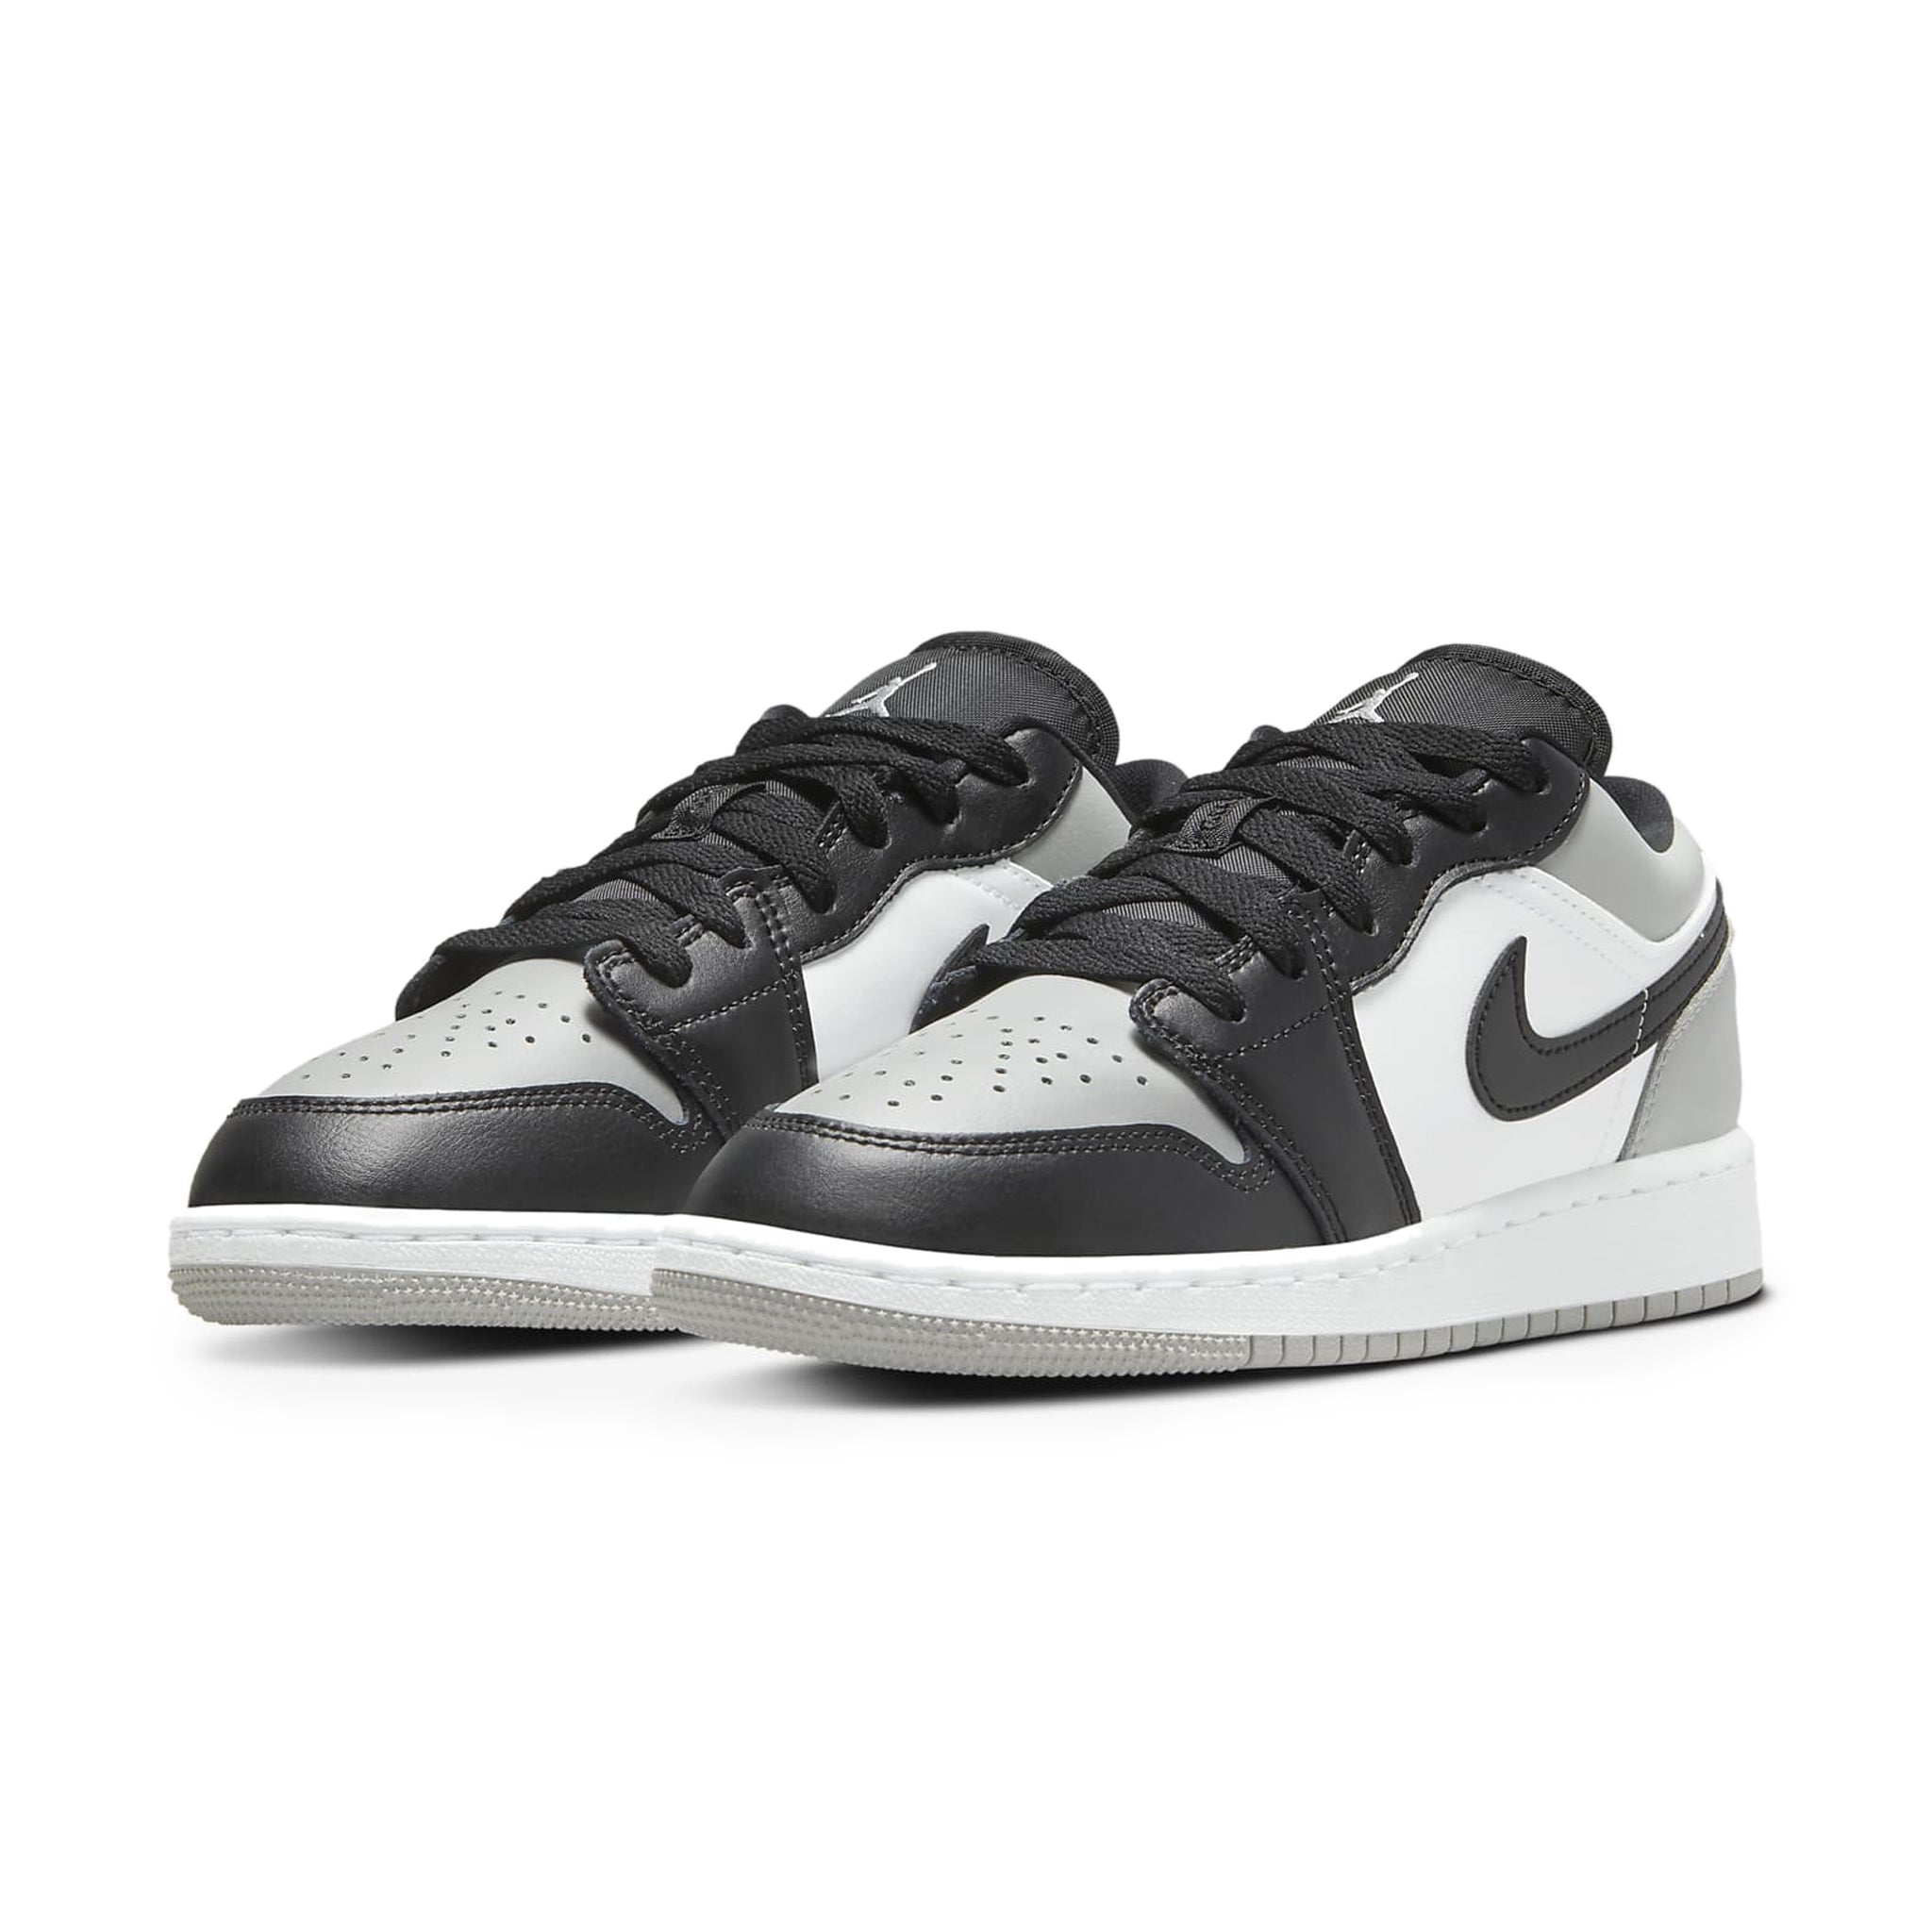 Front side view of Air Jordan 1 Low Shadow Toe (GS) 553560-052